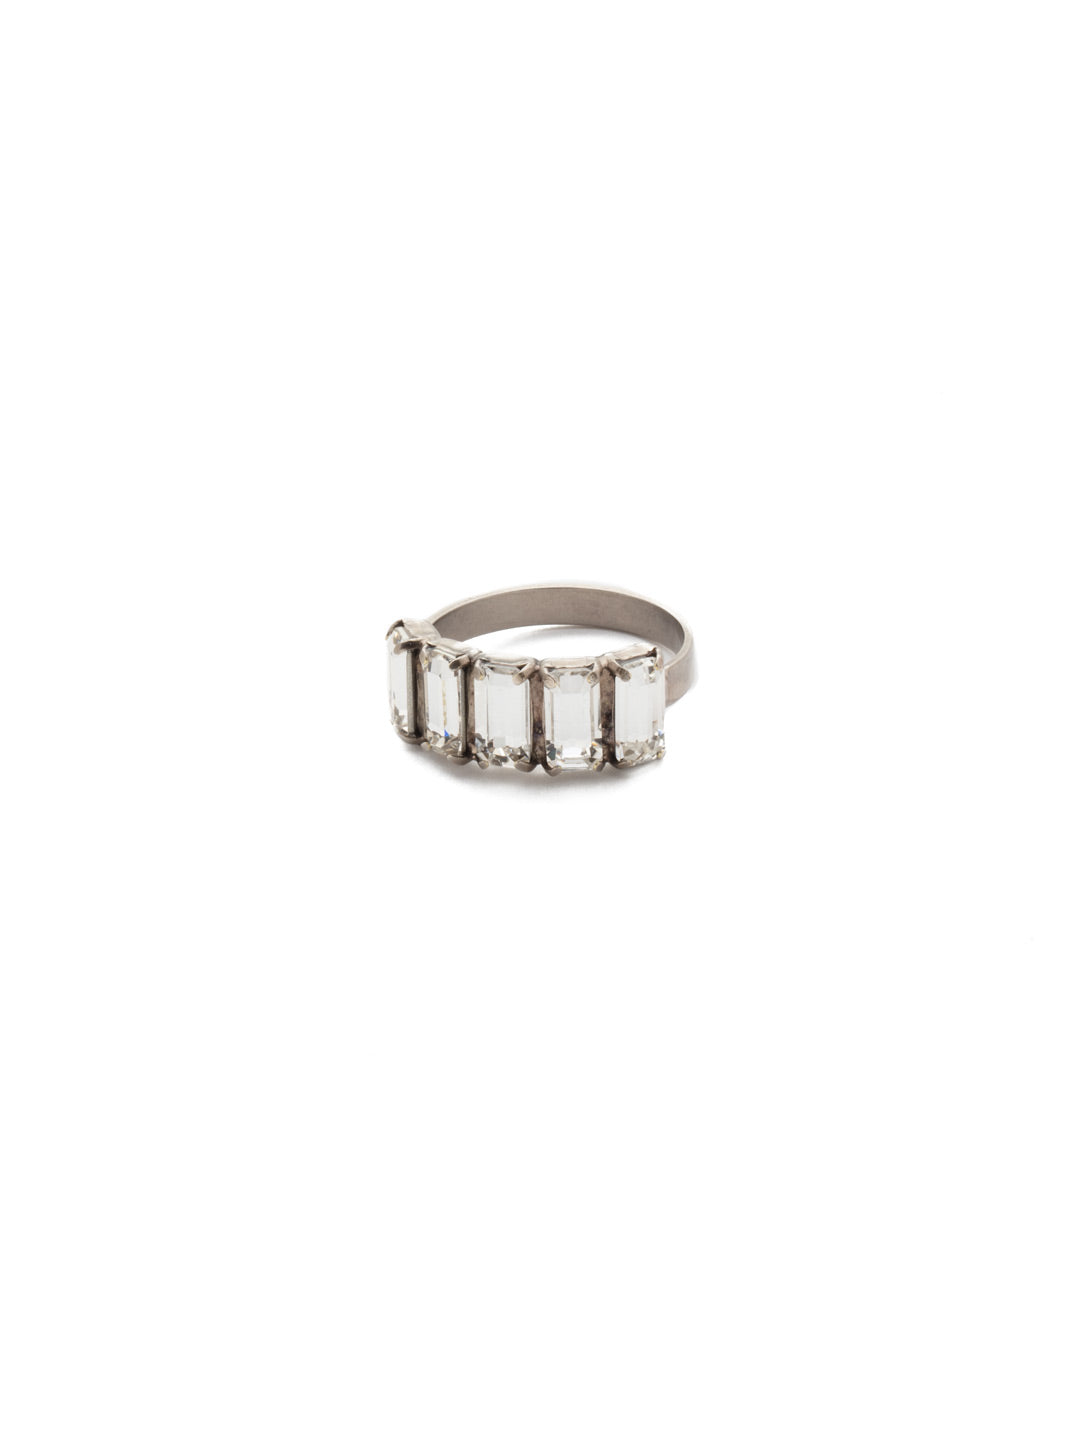 Arden Band Ring - REF29ASCRY